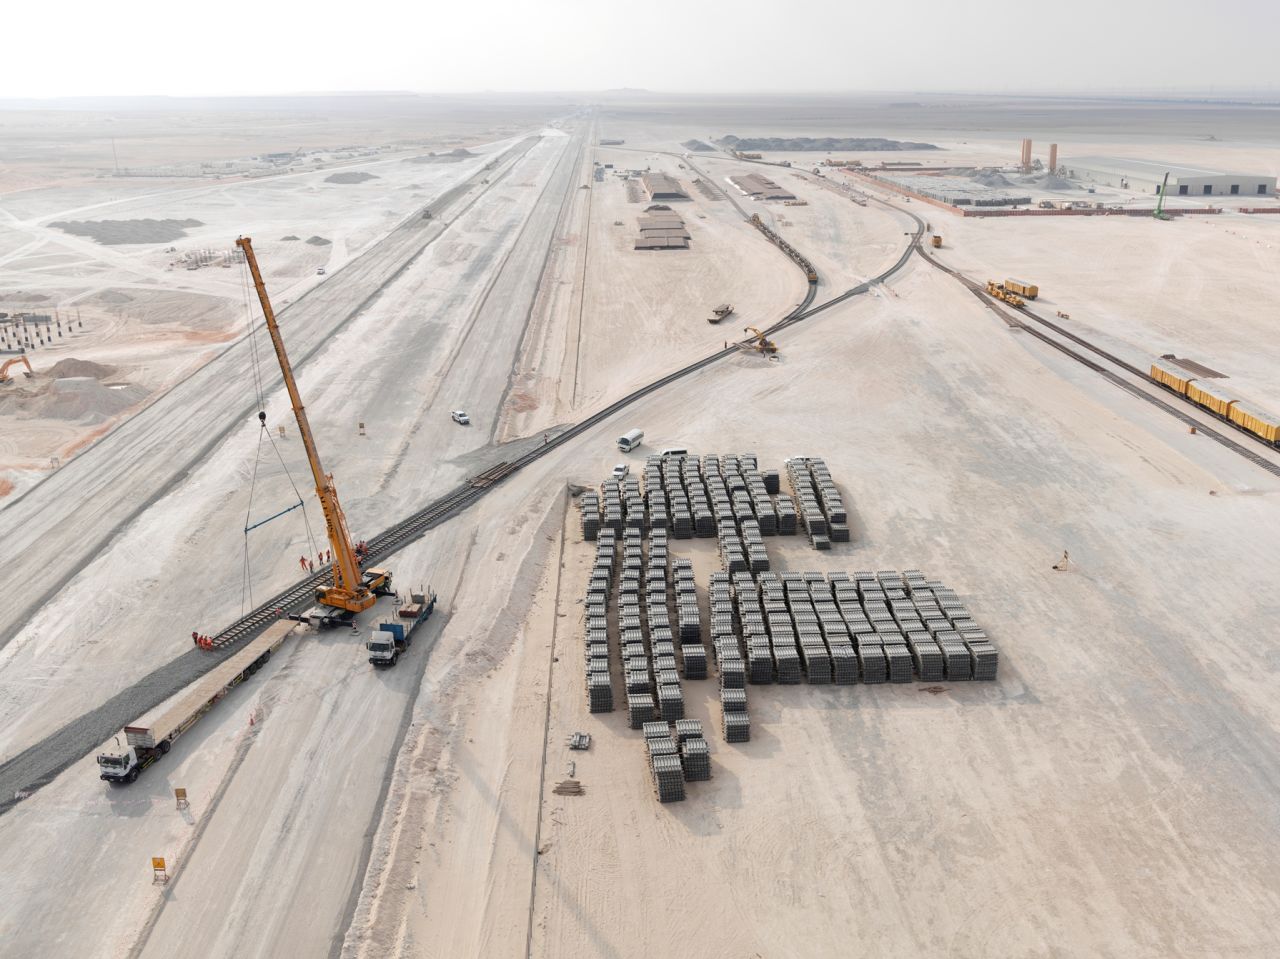 The 1,200 kilometer Etihad Rail network will extend across the desert hinterland of the United Arab Emirates, costing a cool $11 billion and enhancing freight and passenger transport infrastructure across the country.